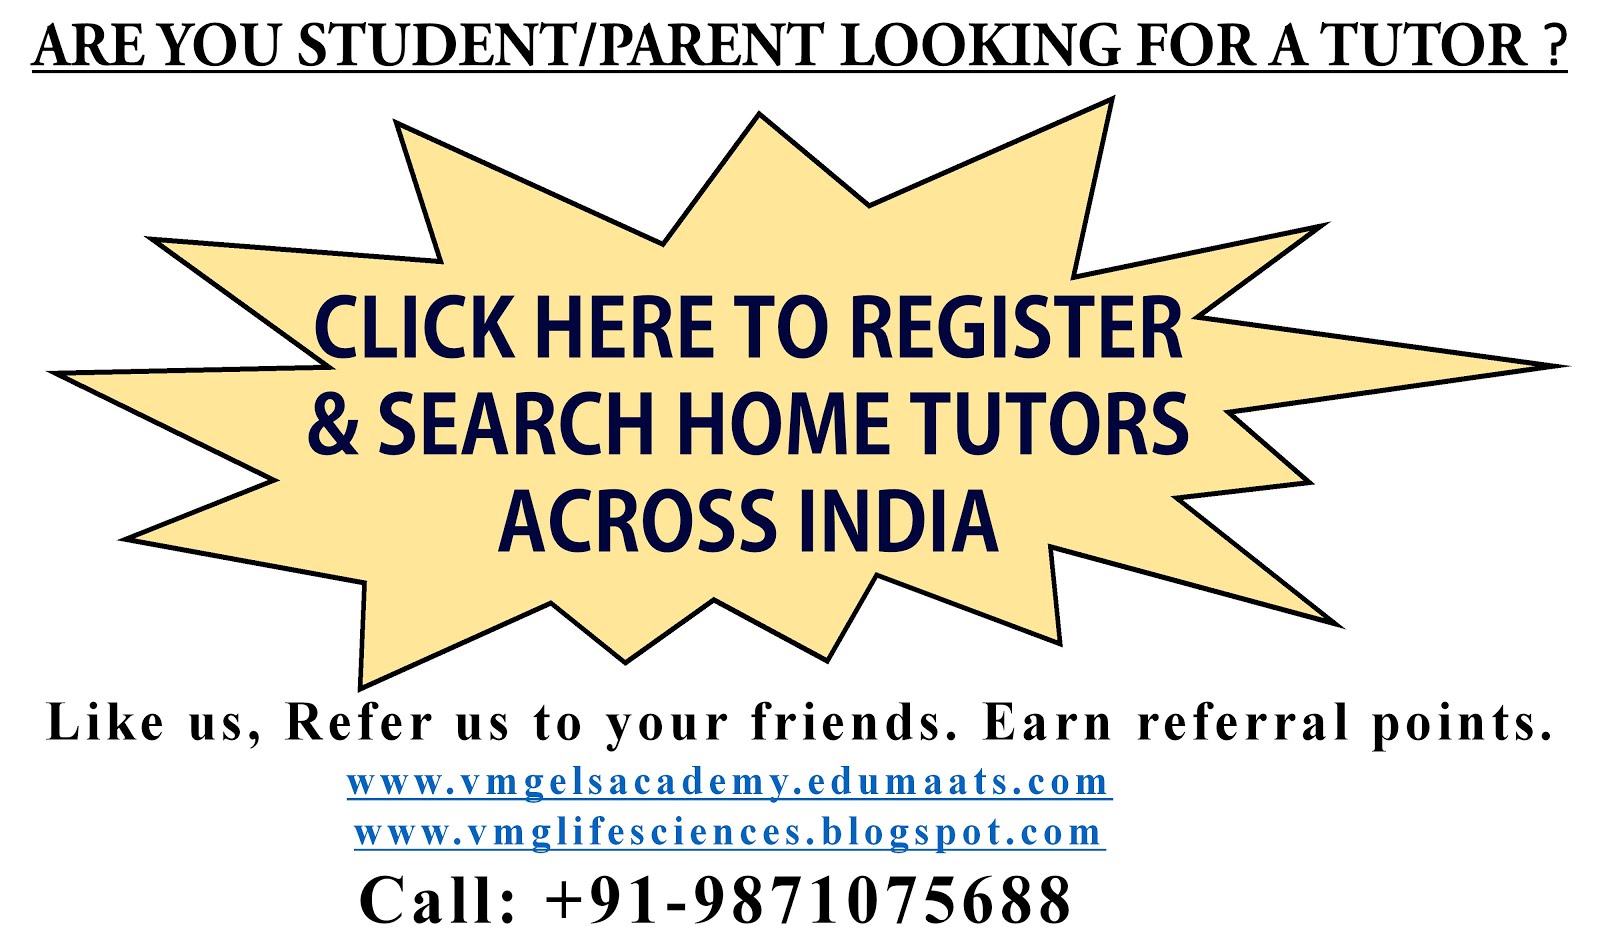 SEARCH FOR TUTORS IN YOUR AREA